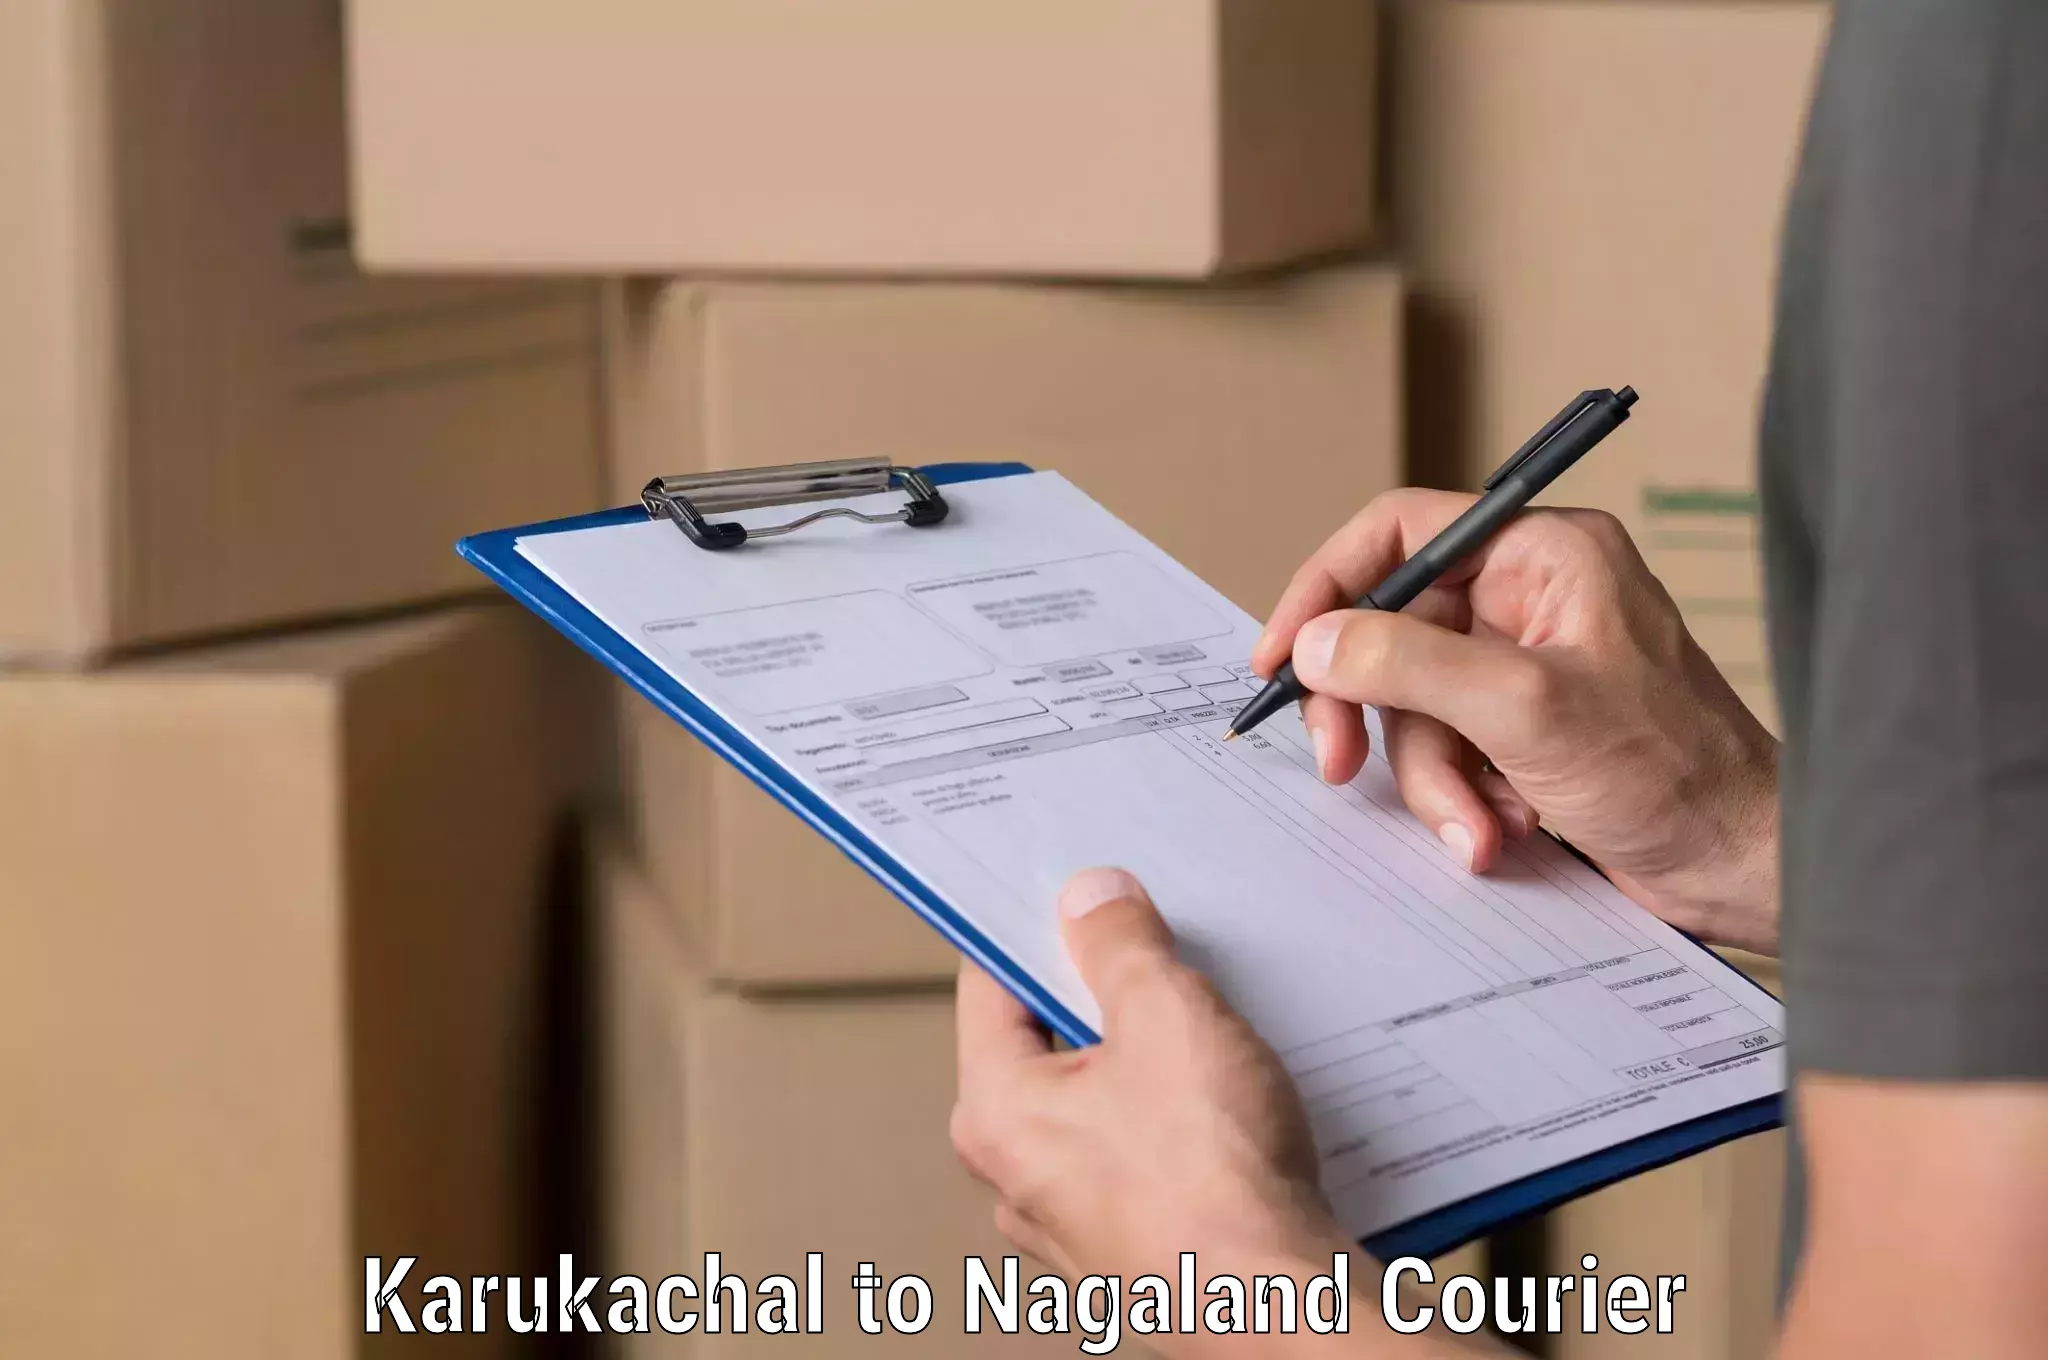 Nationwide courier service Karukachal to Nagaland